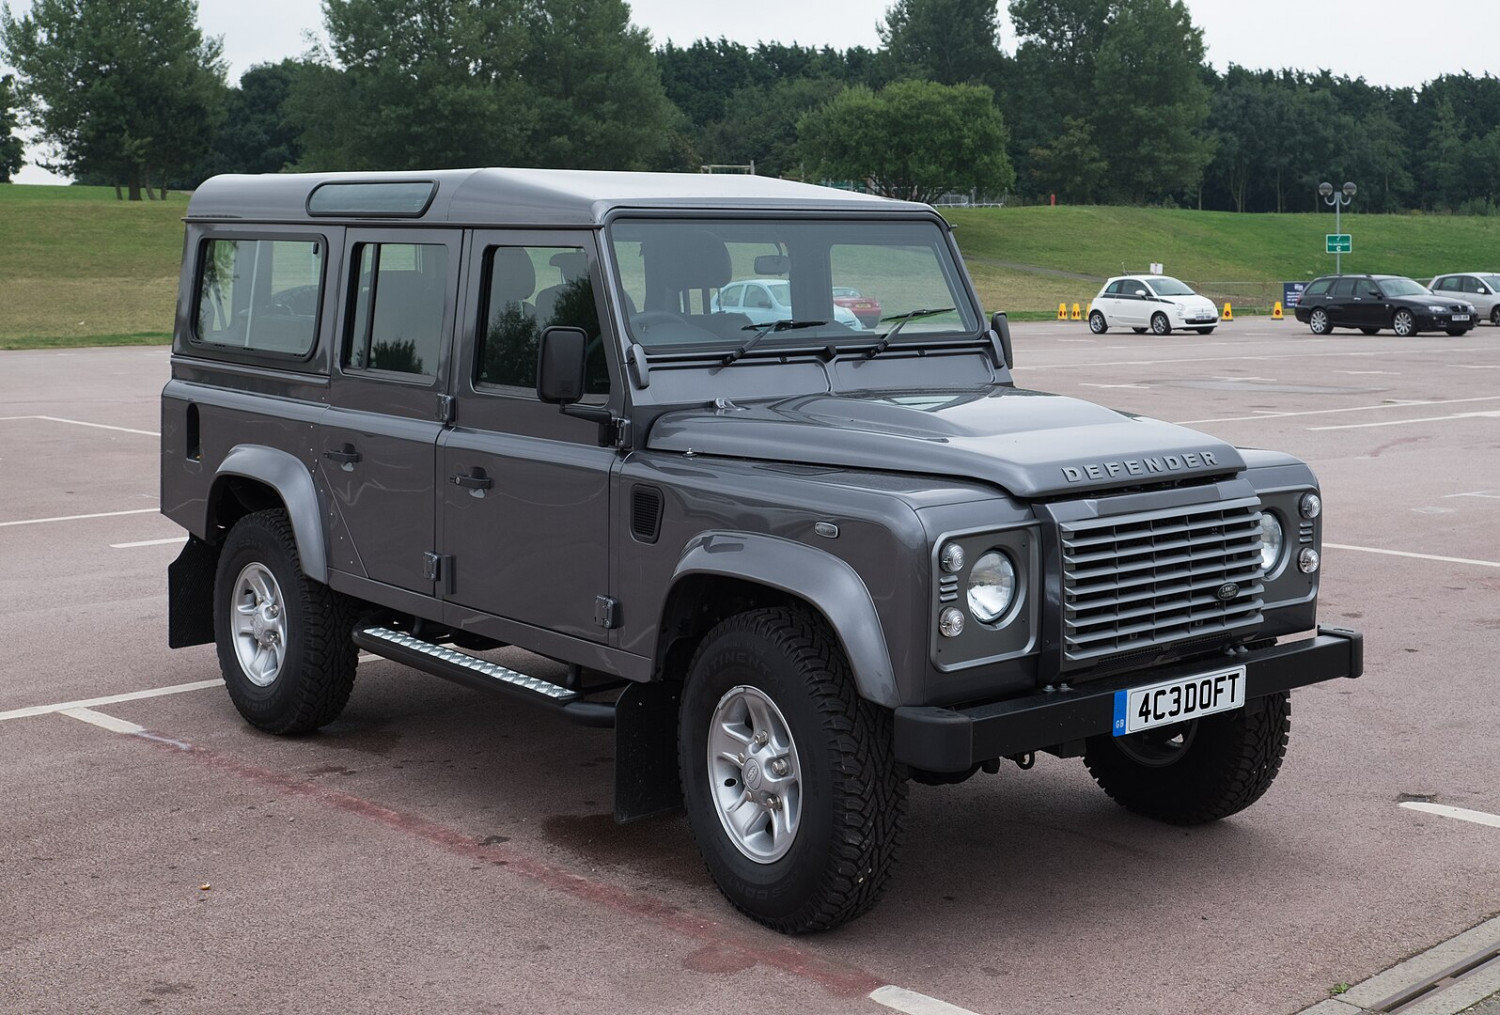 Example of a Defender